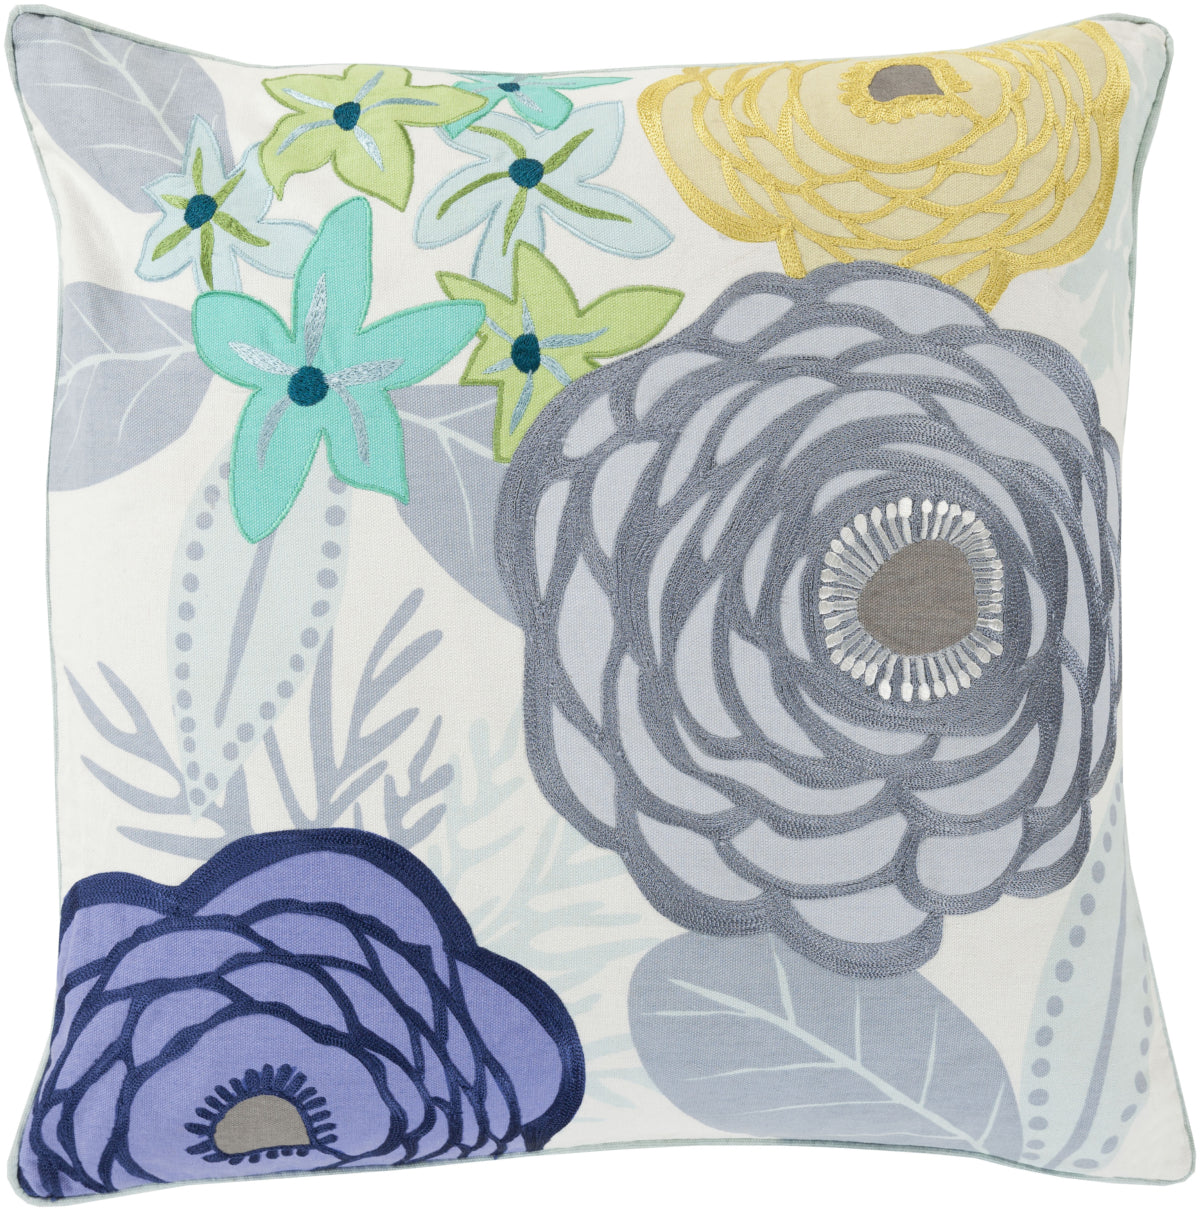 Surya Buttercup Flawlessly Floral BTC-004 Pillow by Kate Spain main image